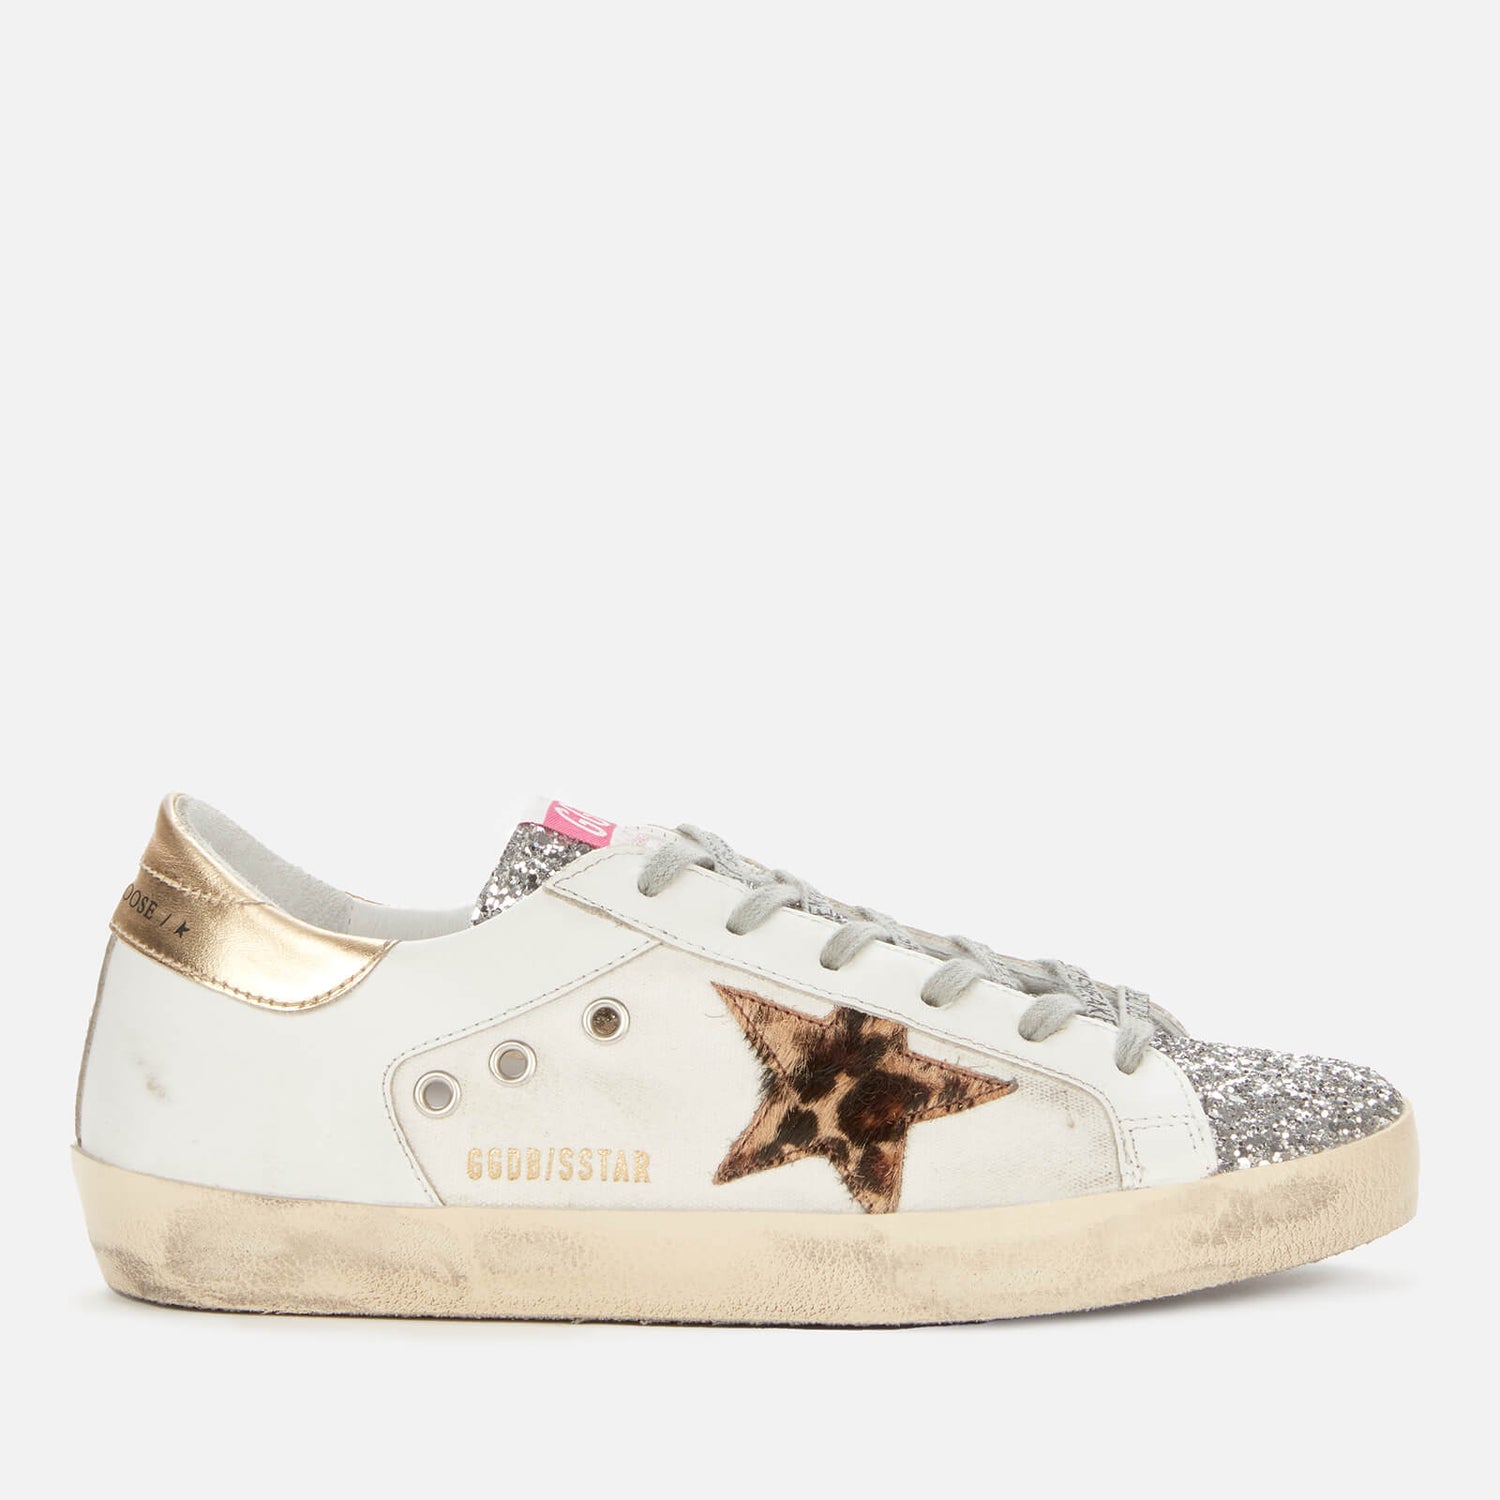 Golden Goose Women's Superstar Leather/Canvas Trainers - White/Silver/Beige - UK 5